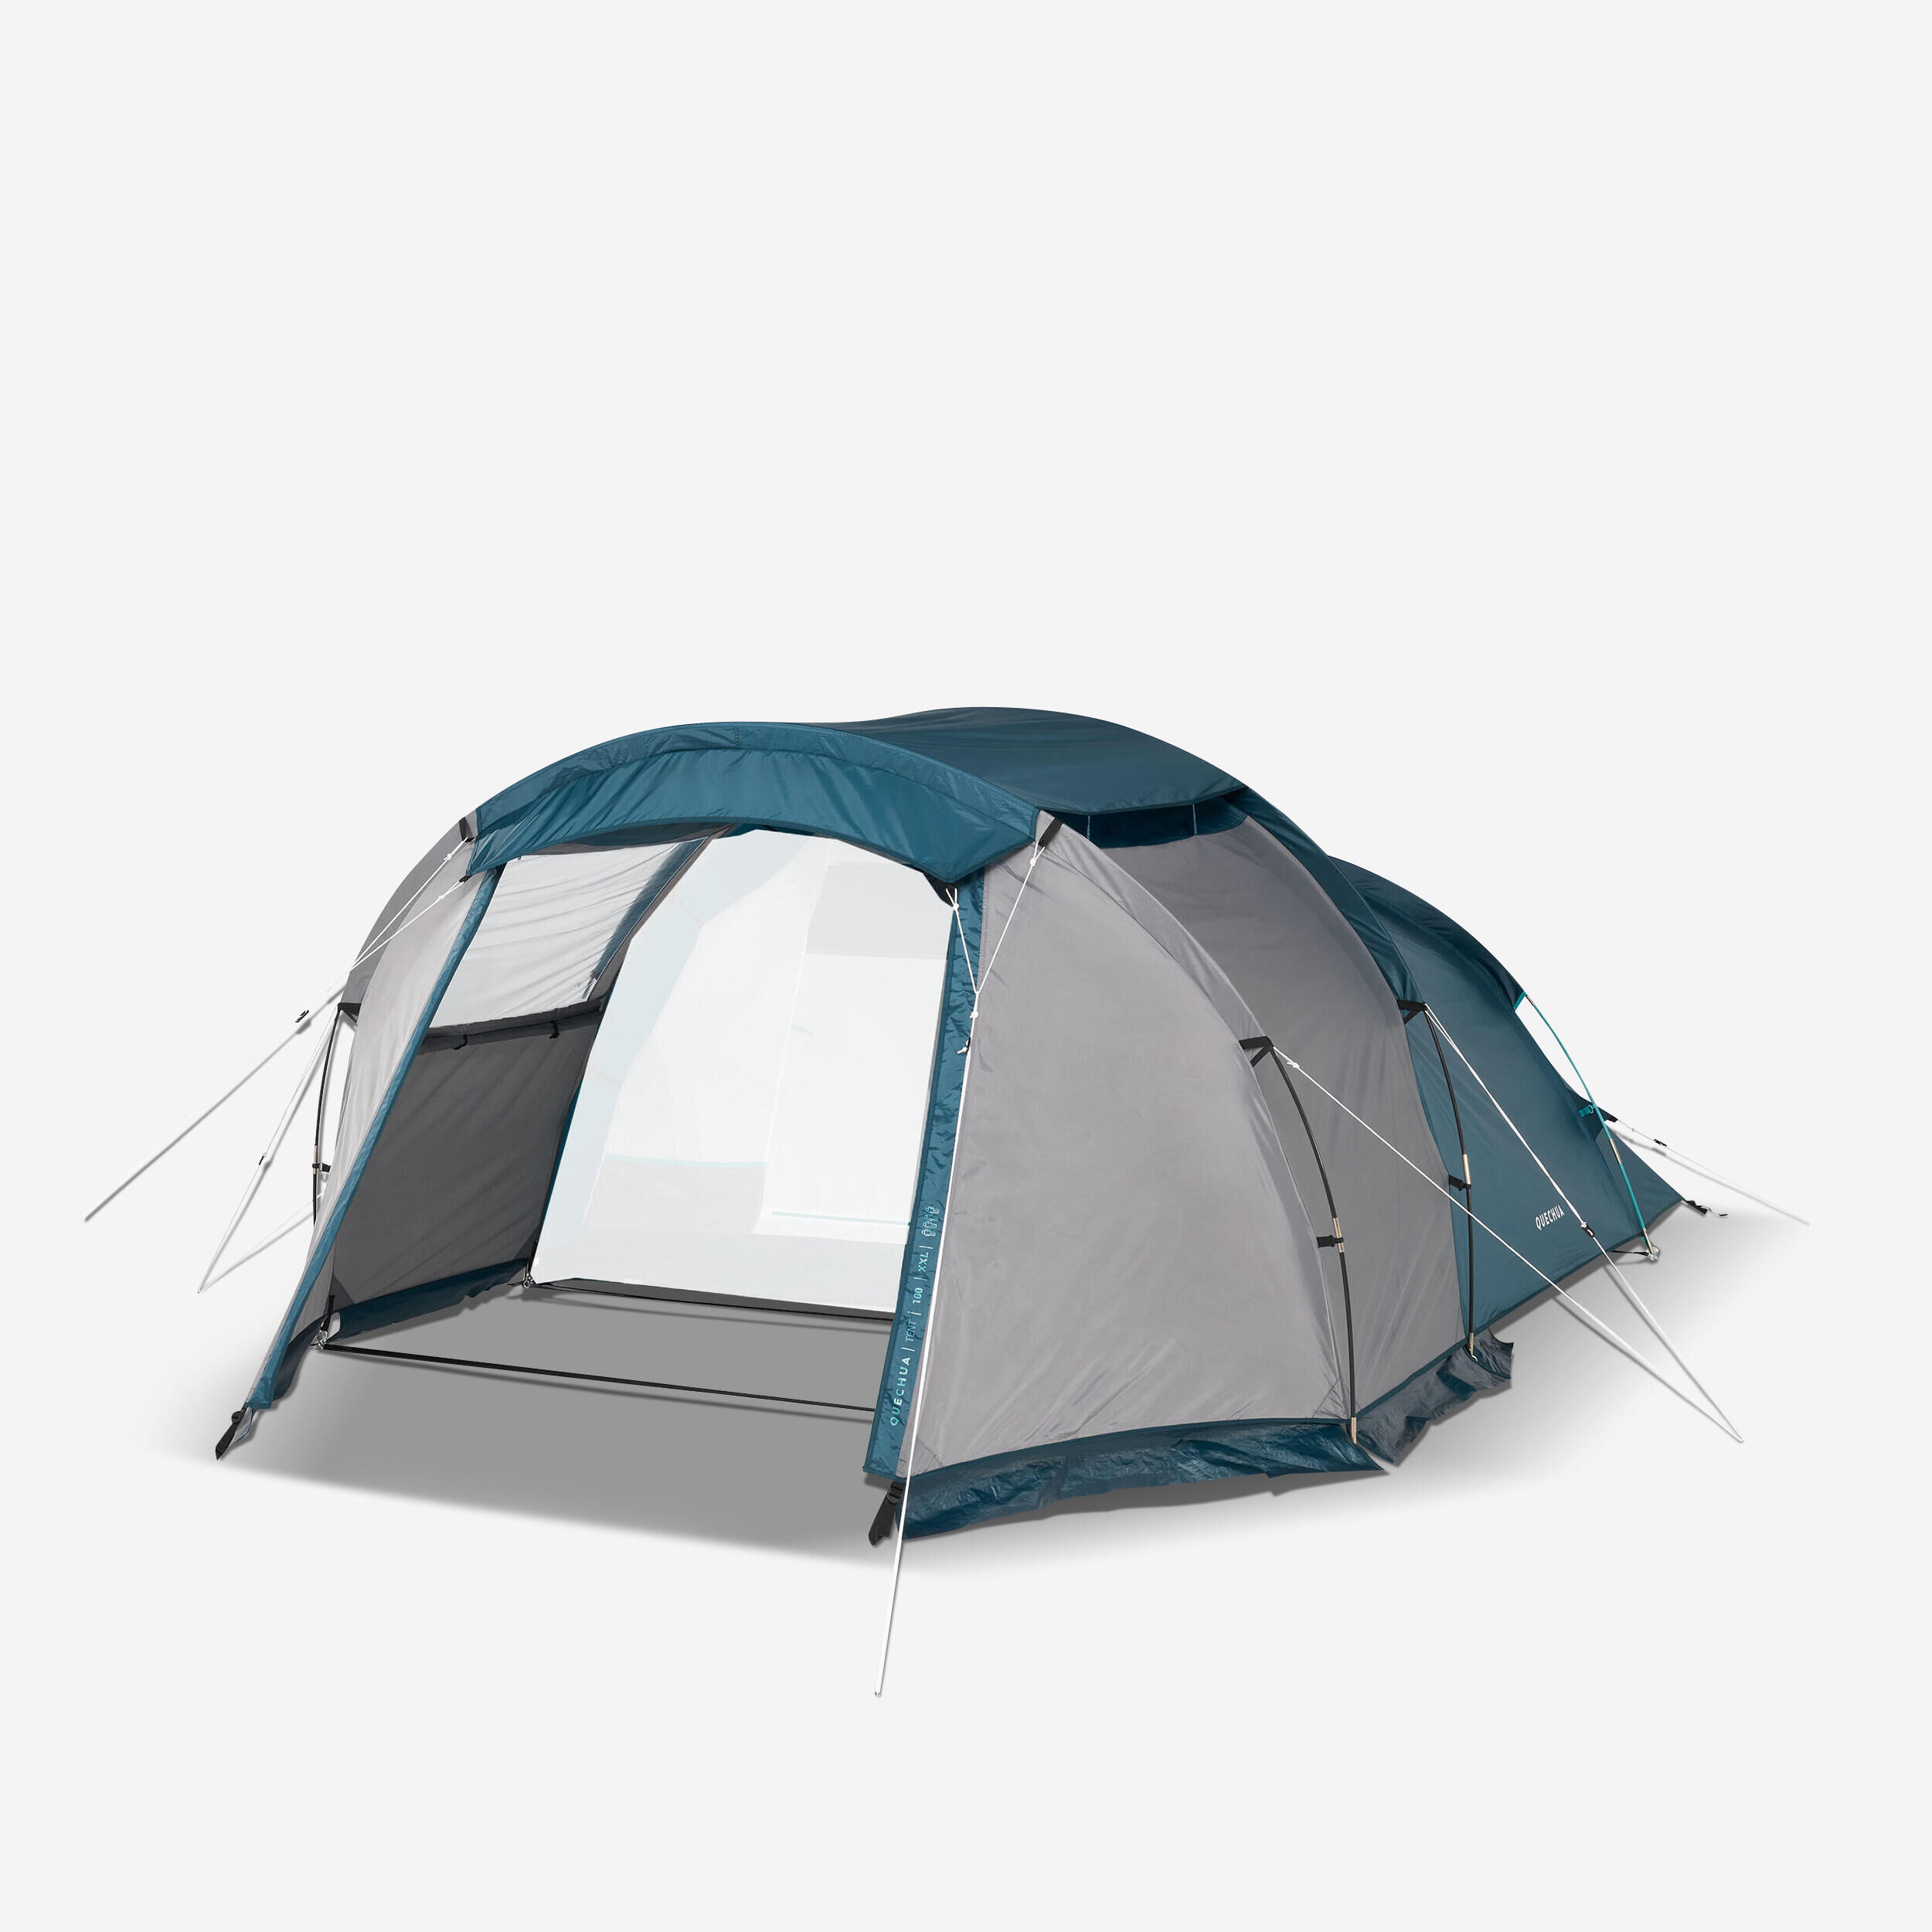 QUECHUA FLYSHEET - SPARE PART FOR THE MH100 XXL 4 PERSON TENT